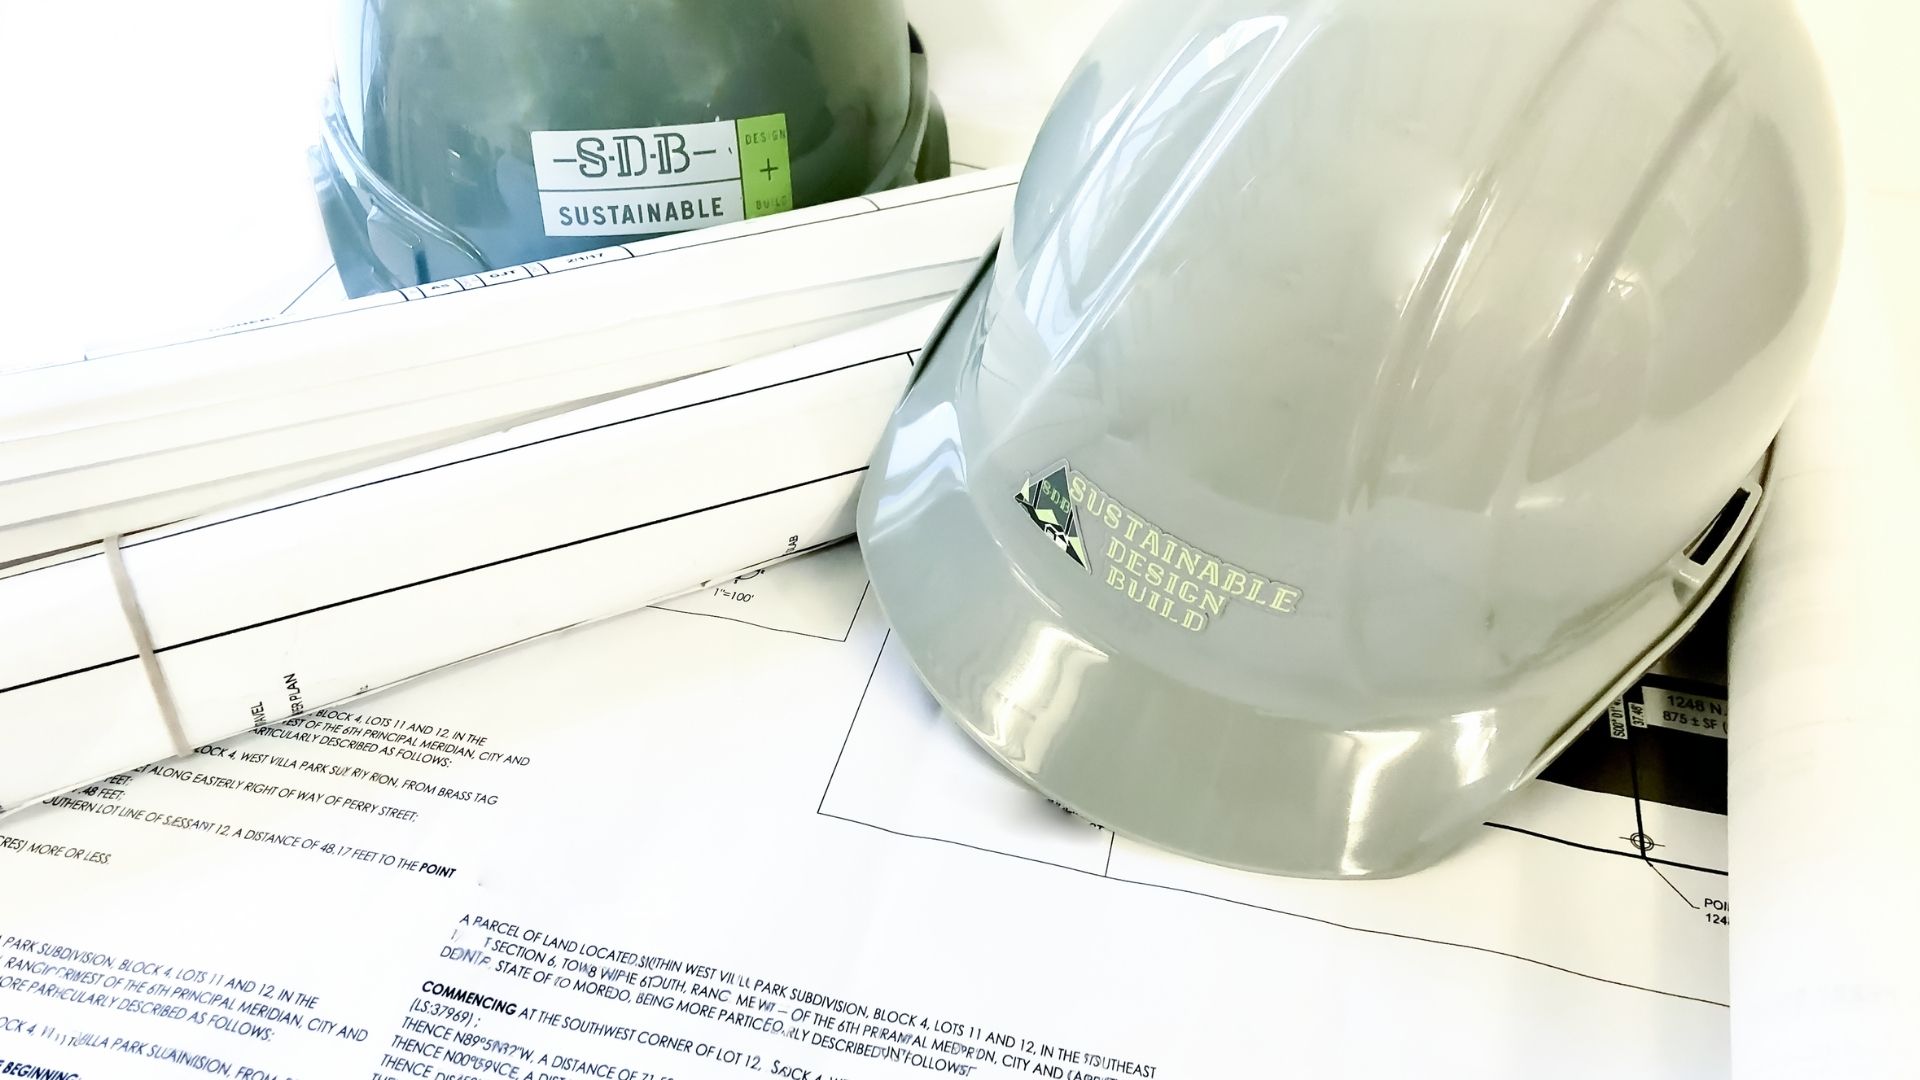 Sustainable Design Build Multi family construction helmets plan draft planning Sustainable Design Build Denver Commercial Construction Land Development Project Management Consulting preconstruction